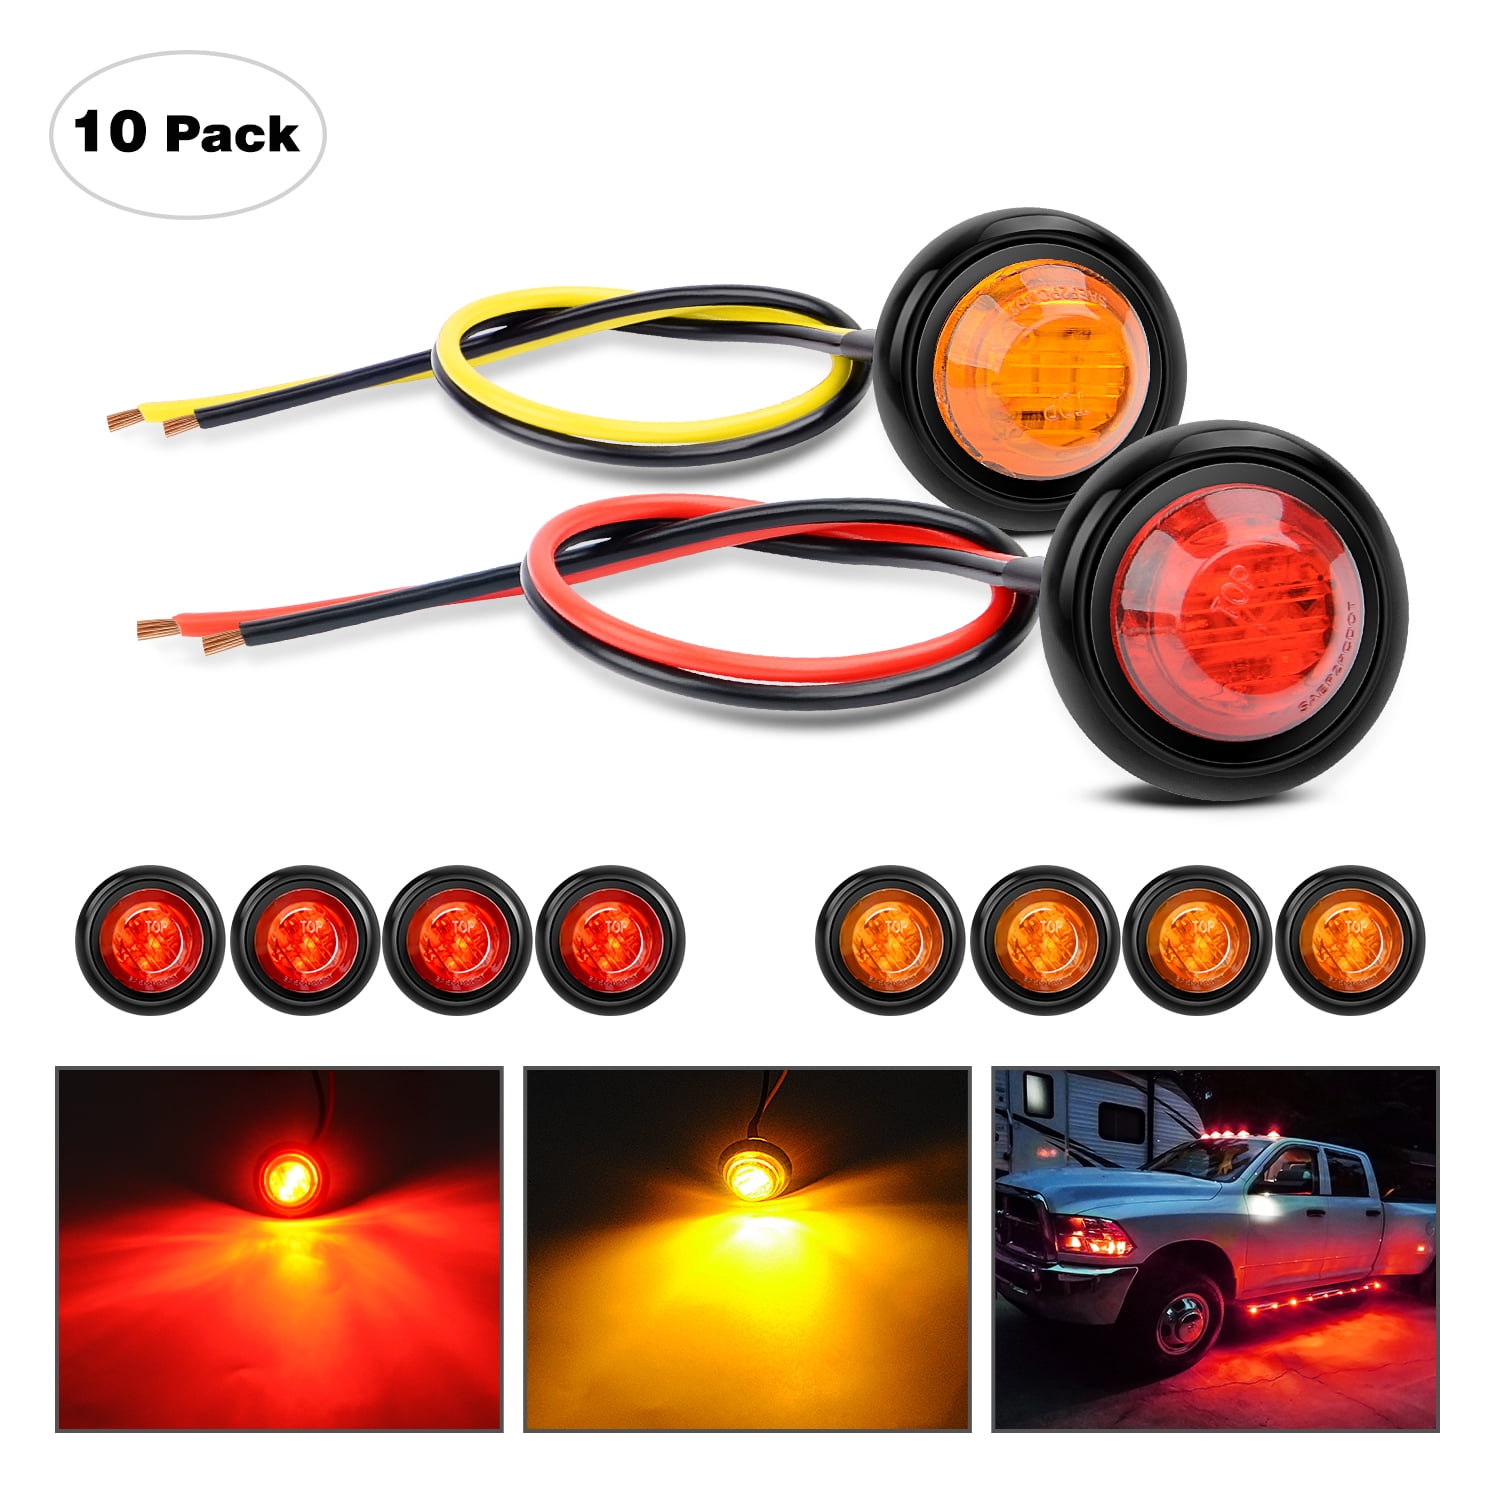 MARINE BOAT RV BUS TRAILER TRUCK AUTO LED 3 RED COLORED ROUND COURTESY LIGHT ODM 